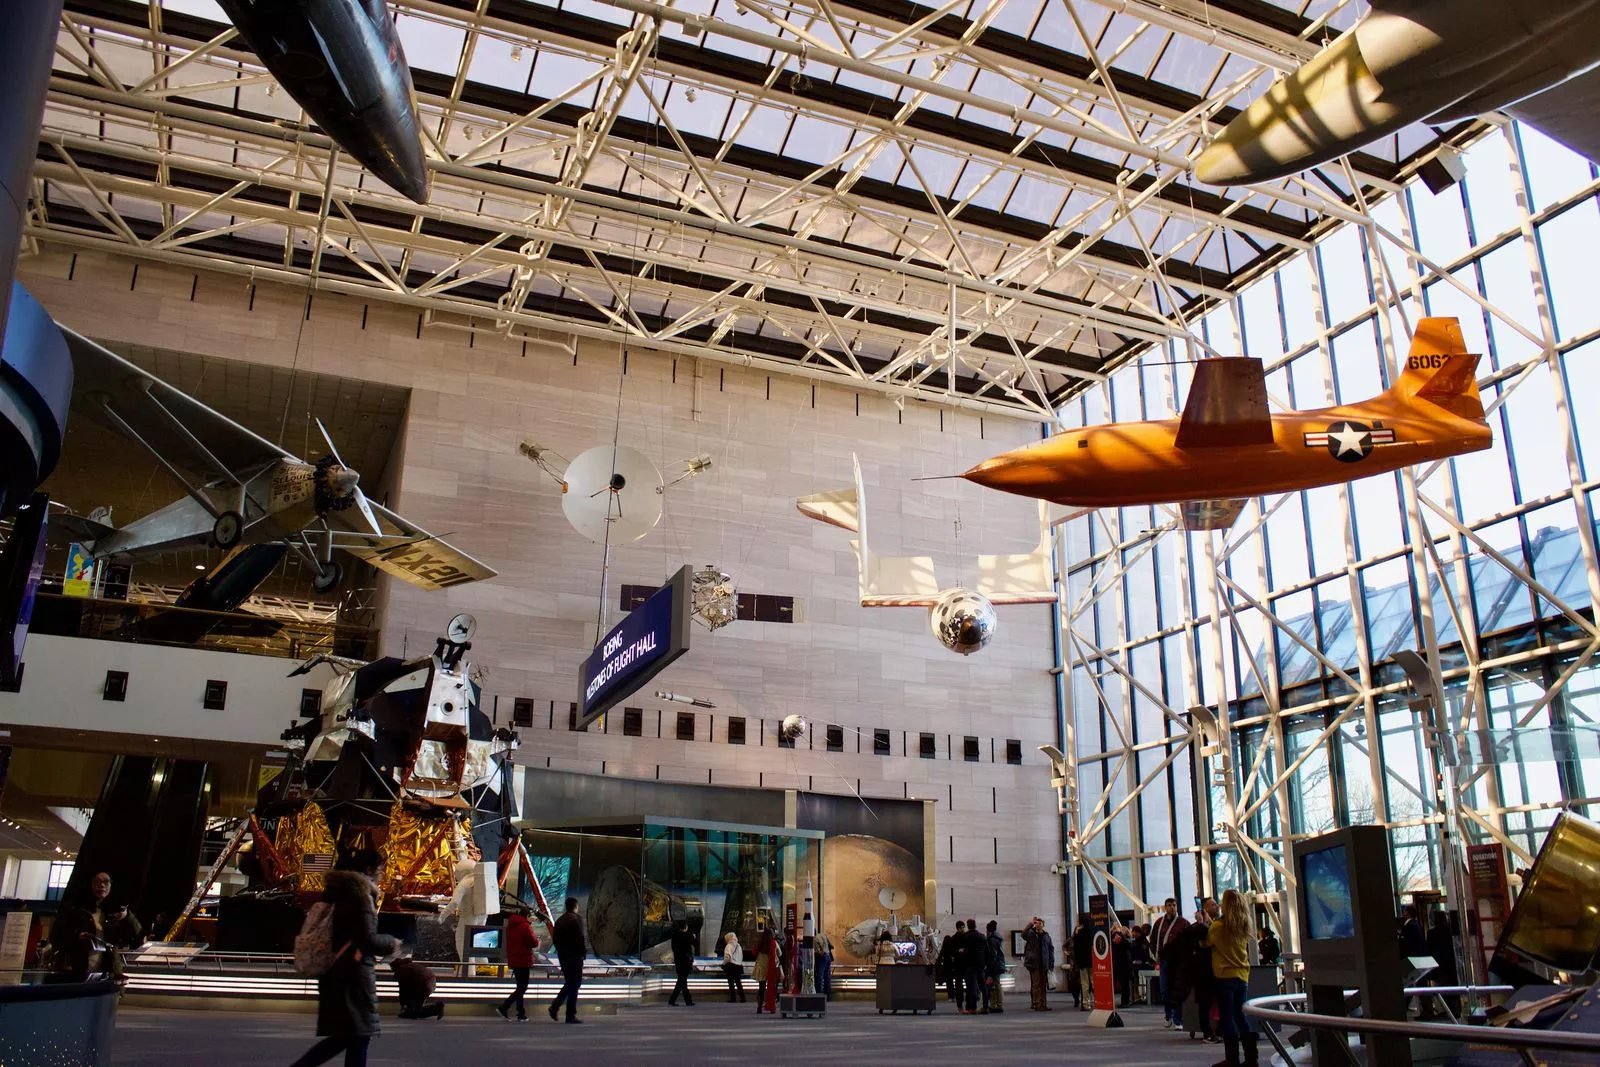 National Aerospace Museum in Chile, South America | Museums - Rated 3.9